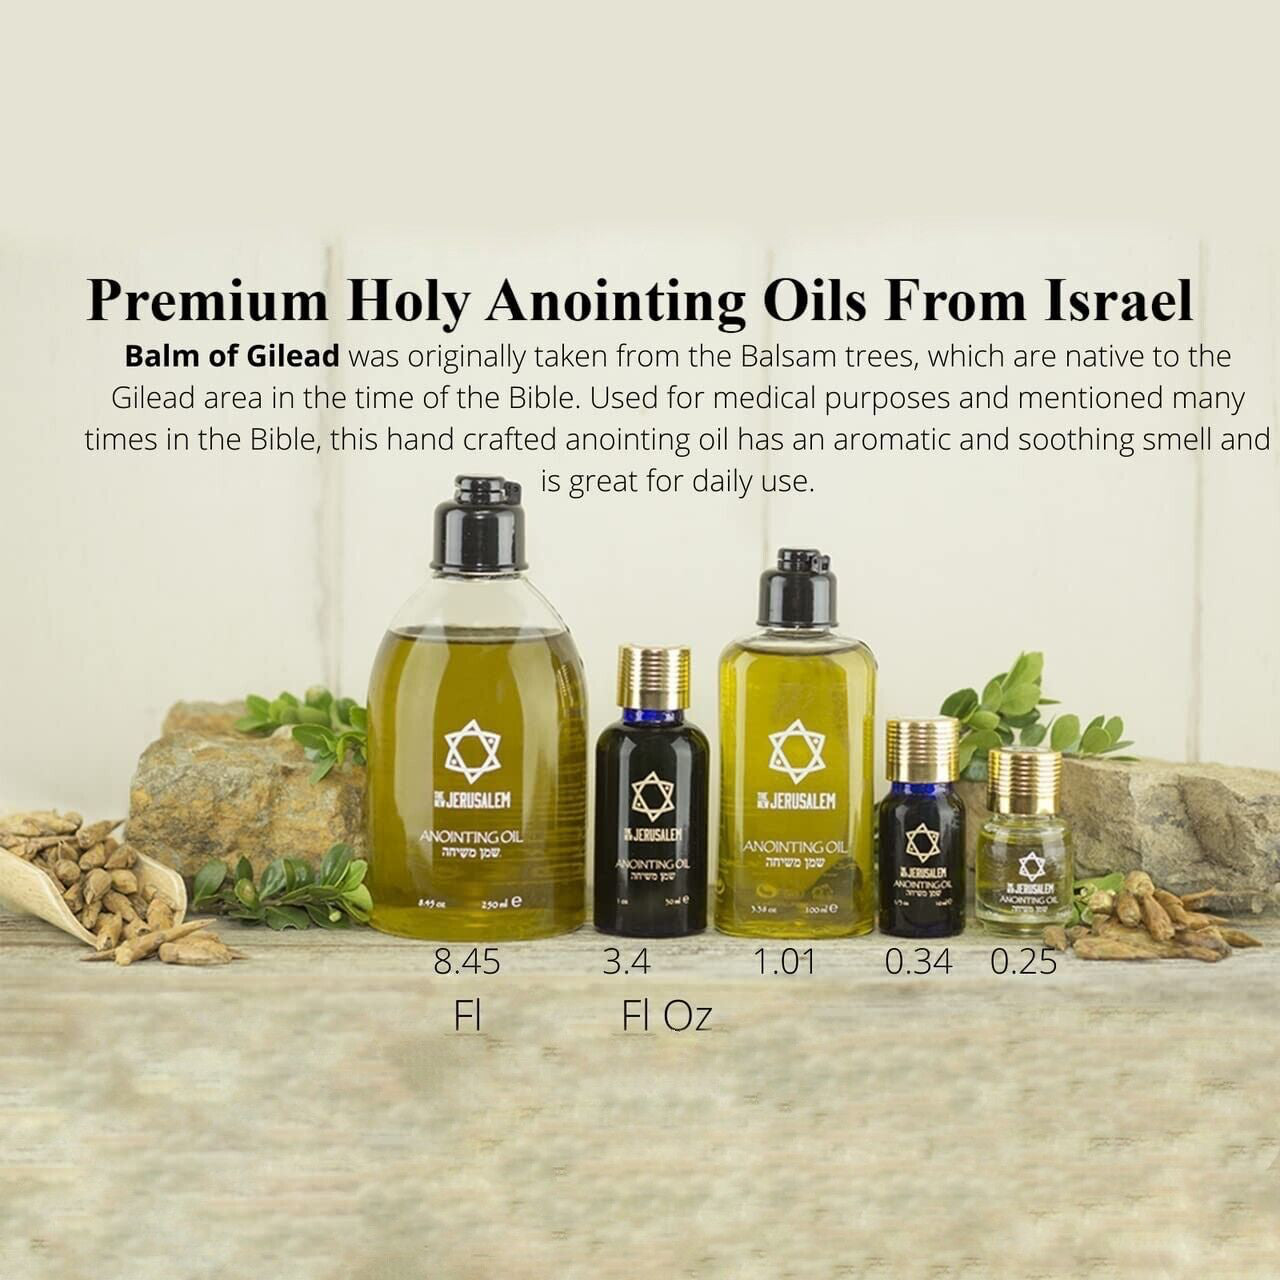 Anointing Oil from Israel, Spiritual Oils Bottles from Jerusalem Blessed, Handmade with Natural Ingredients